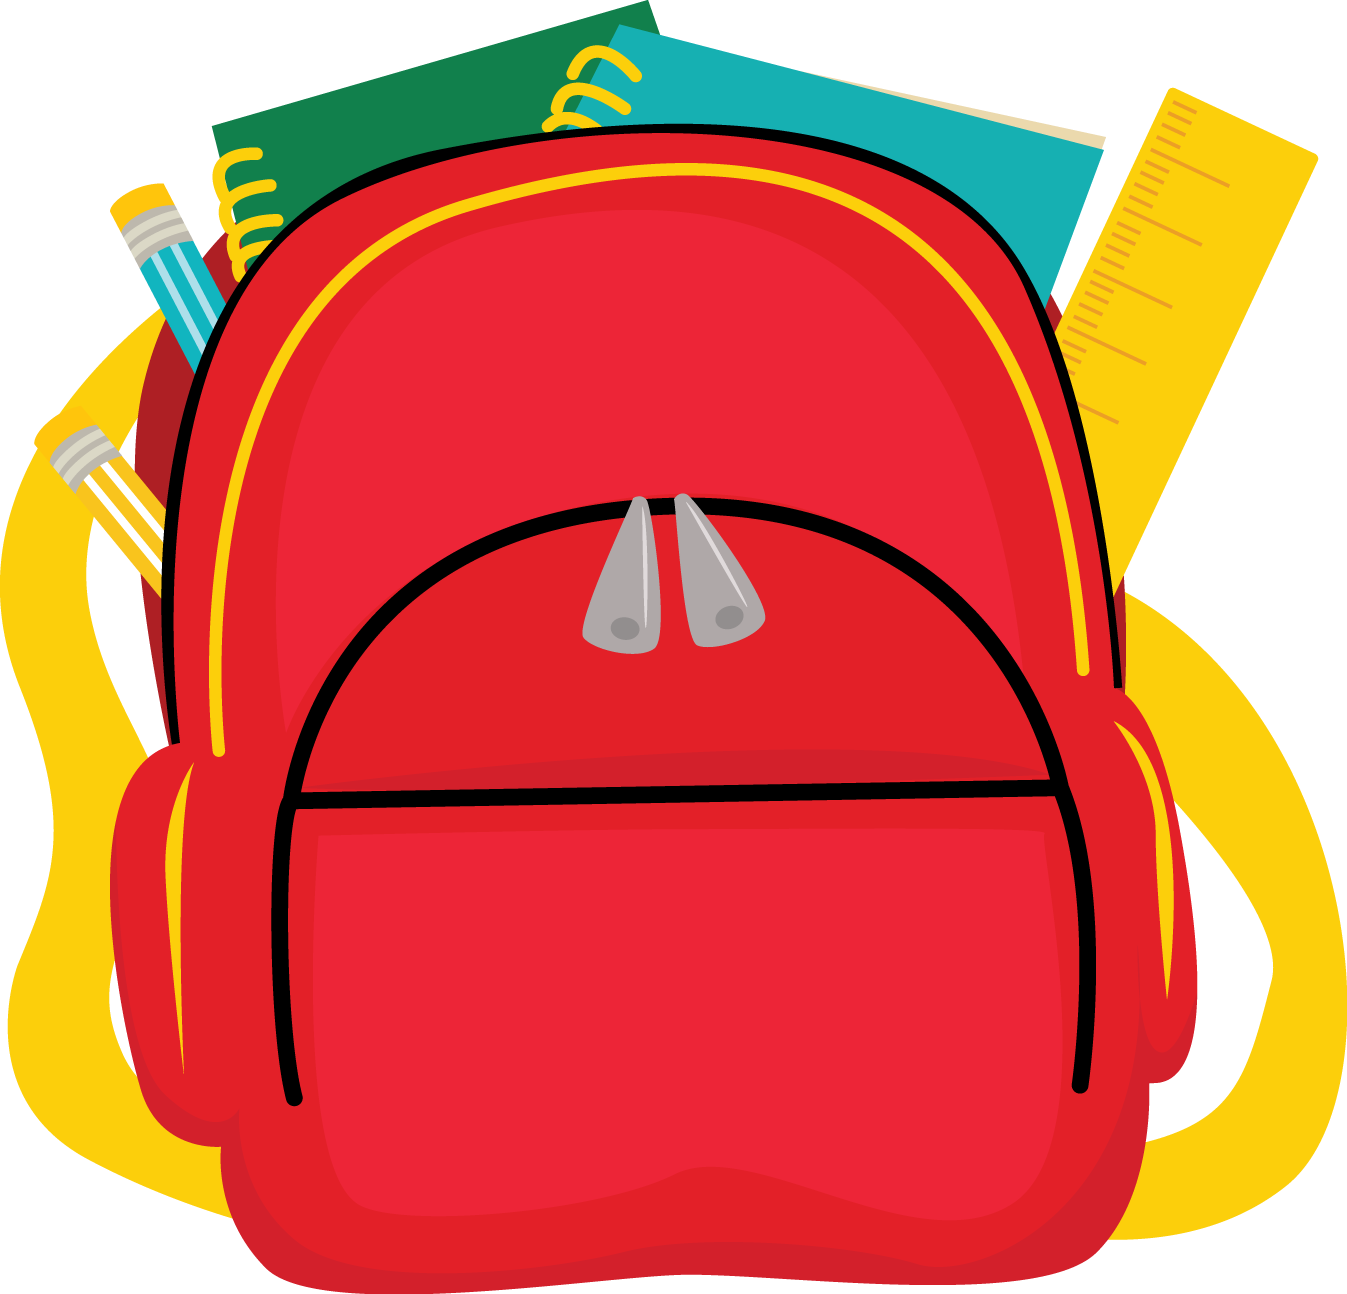 School Bag Png Image Free Download And Clipart Image For Free Download